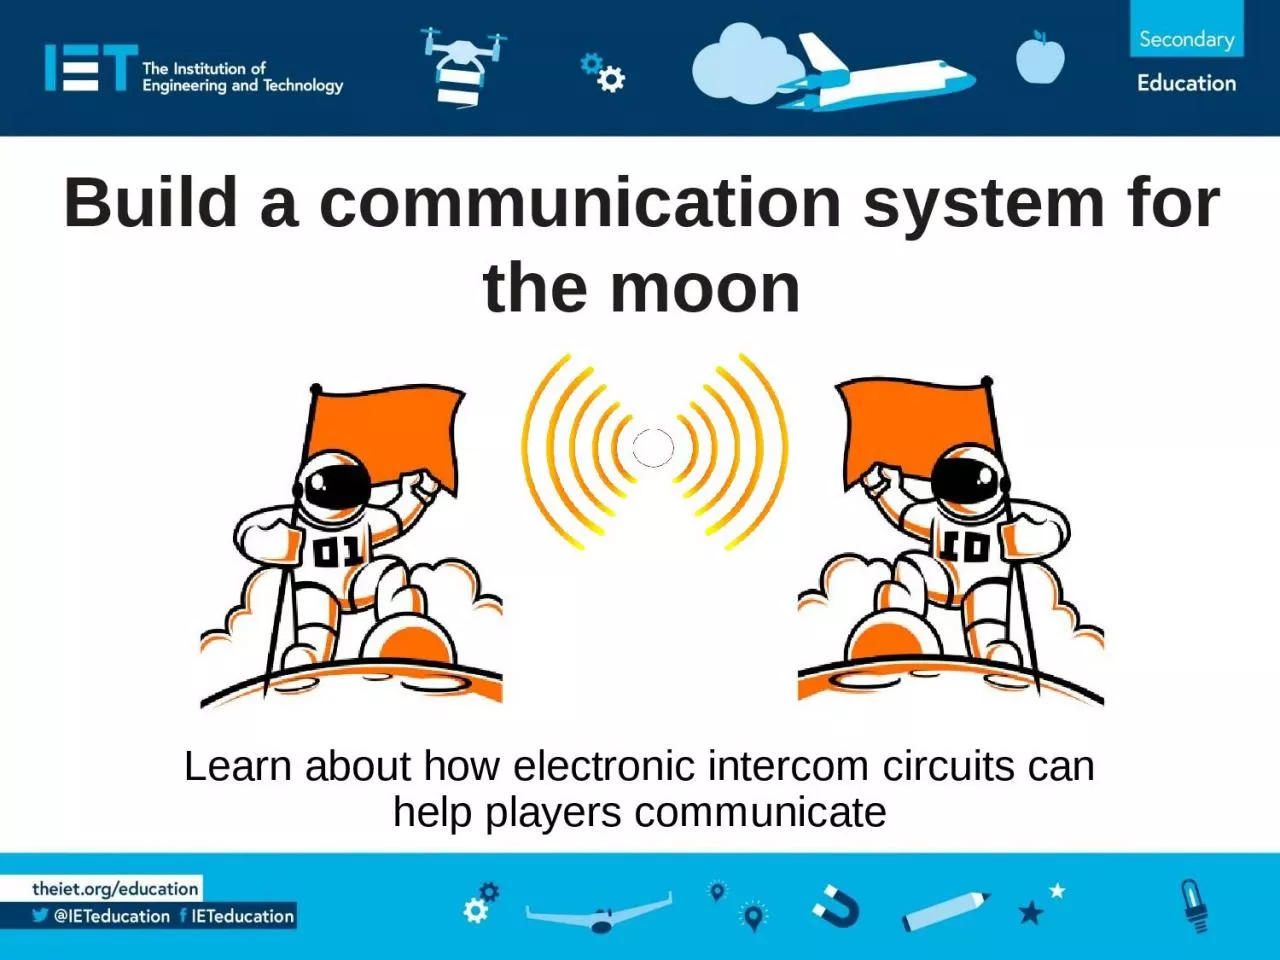 Learn about how electronic intercom circuits can help players communicate